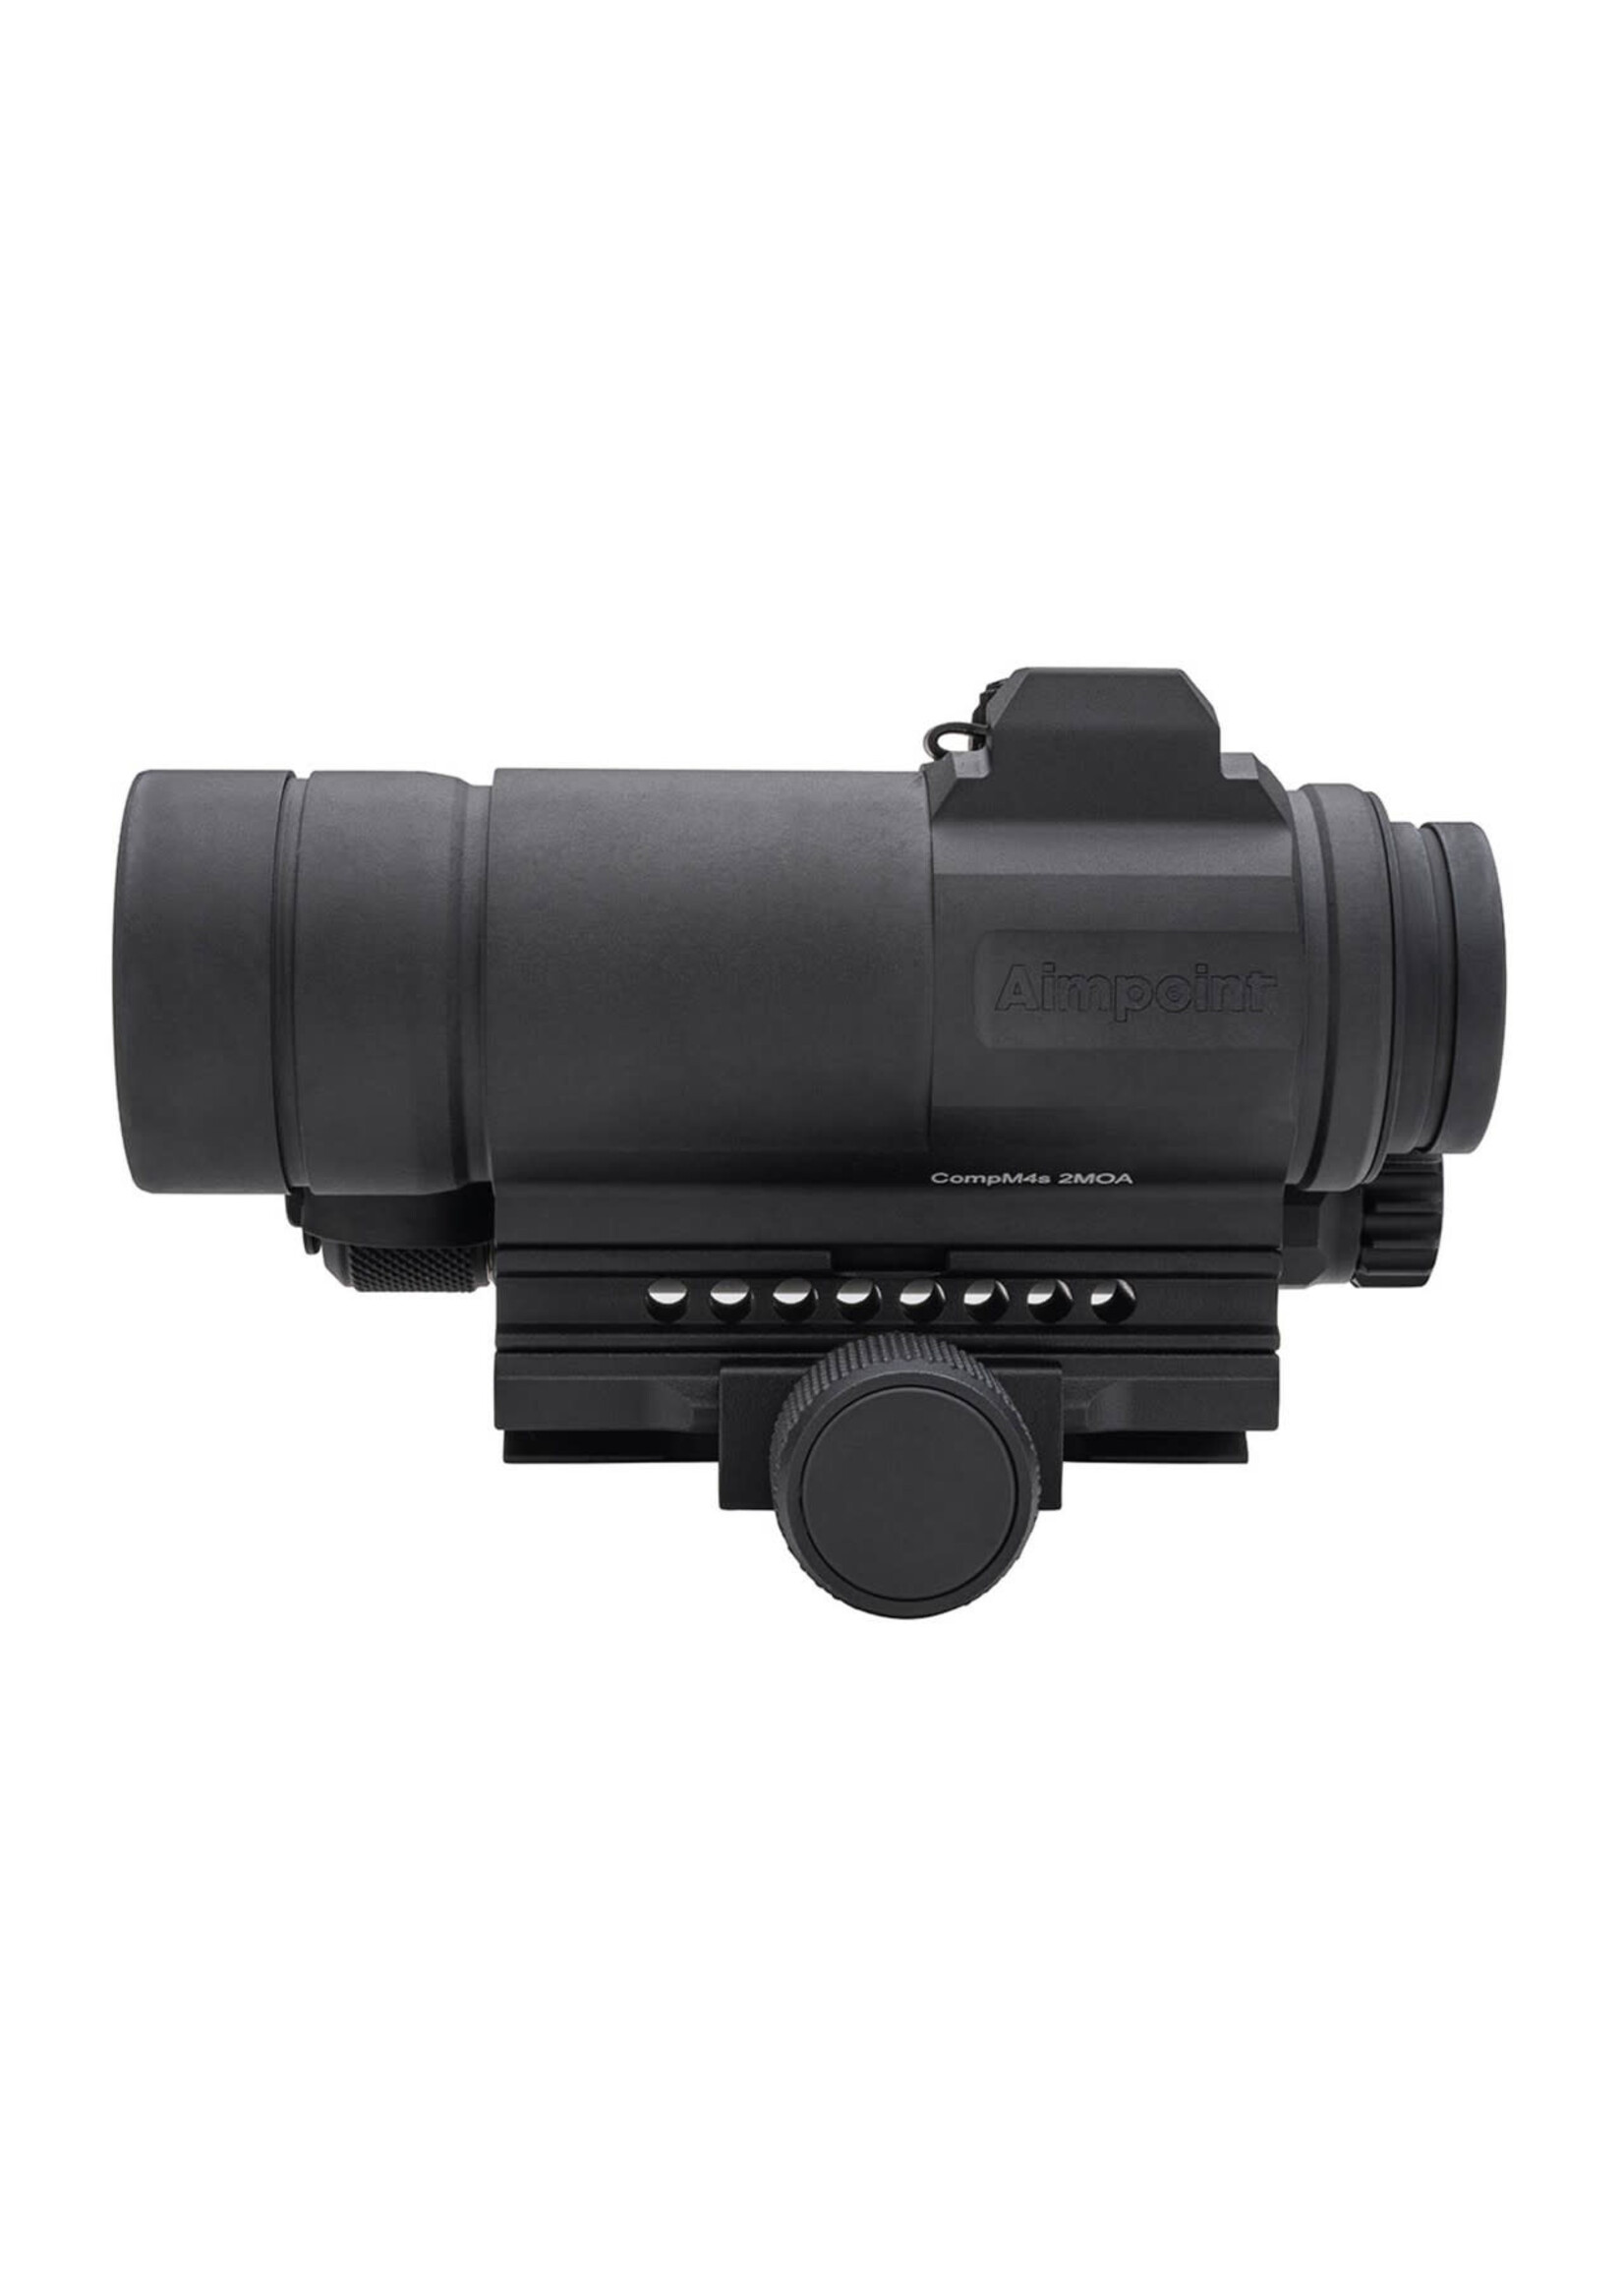 AIMPOINT COMPM4S RED DOT REFLEX SIGHT - QRP2 MOUNT